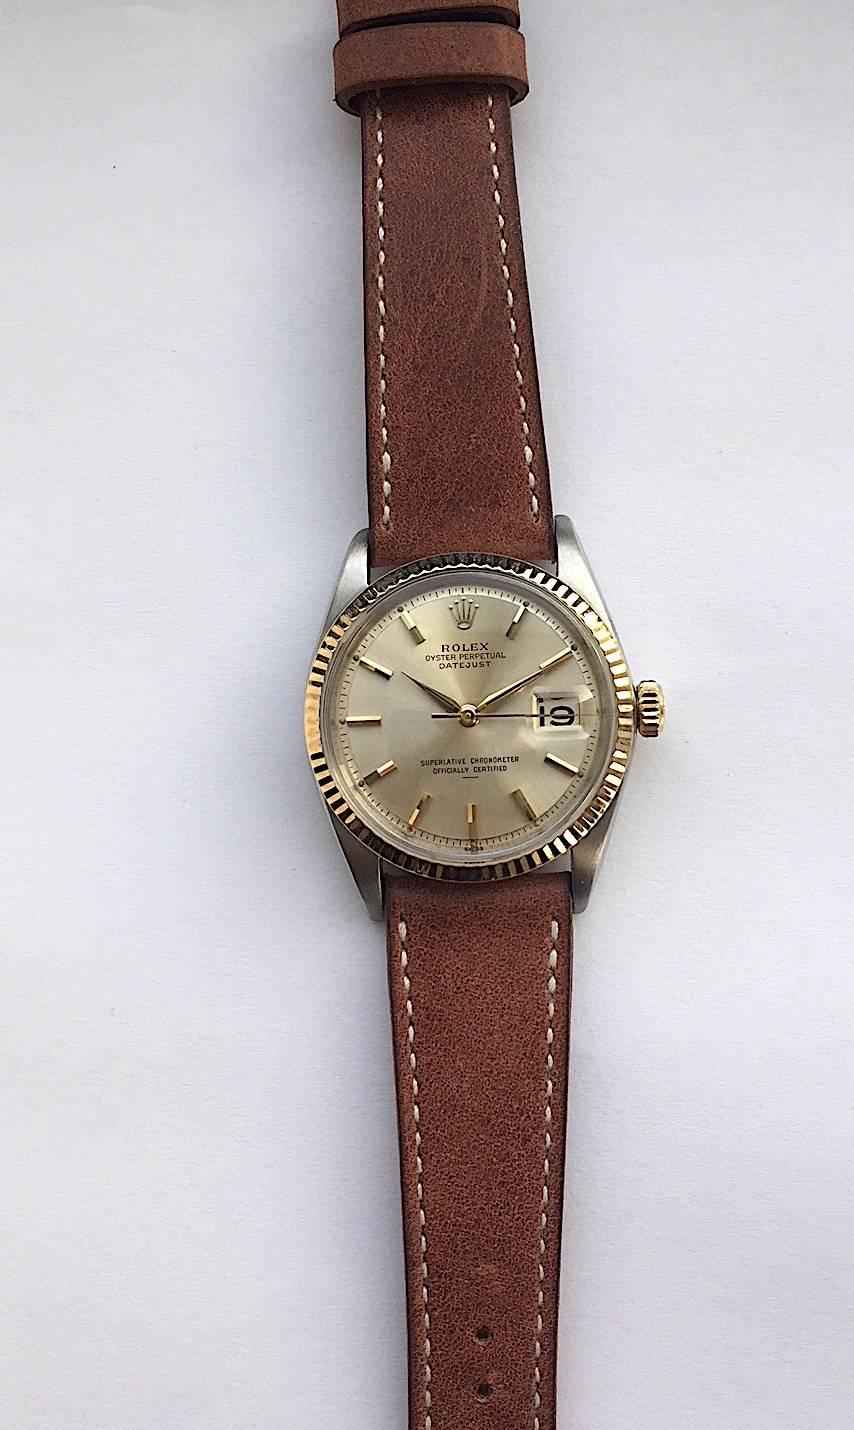 Rolex Stainless Steel and Yellow Gold Oyster Perpetual Datejust Watch
Factory 'Swiss' Only Dial with Underline Marking Corresponding to Early 1960s Production
Yellow Gold Fluted Bezel
36mm in size 
Dauphine Hands
Rolex Calibre Base 1500 Automatic